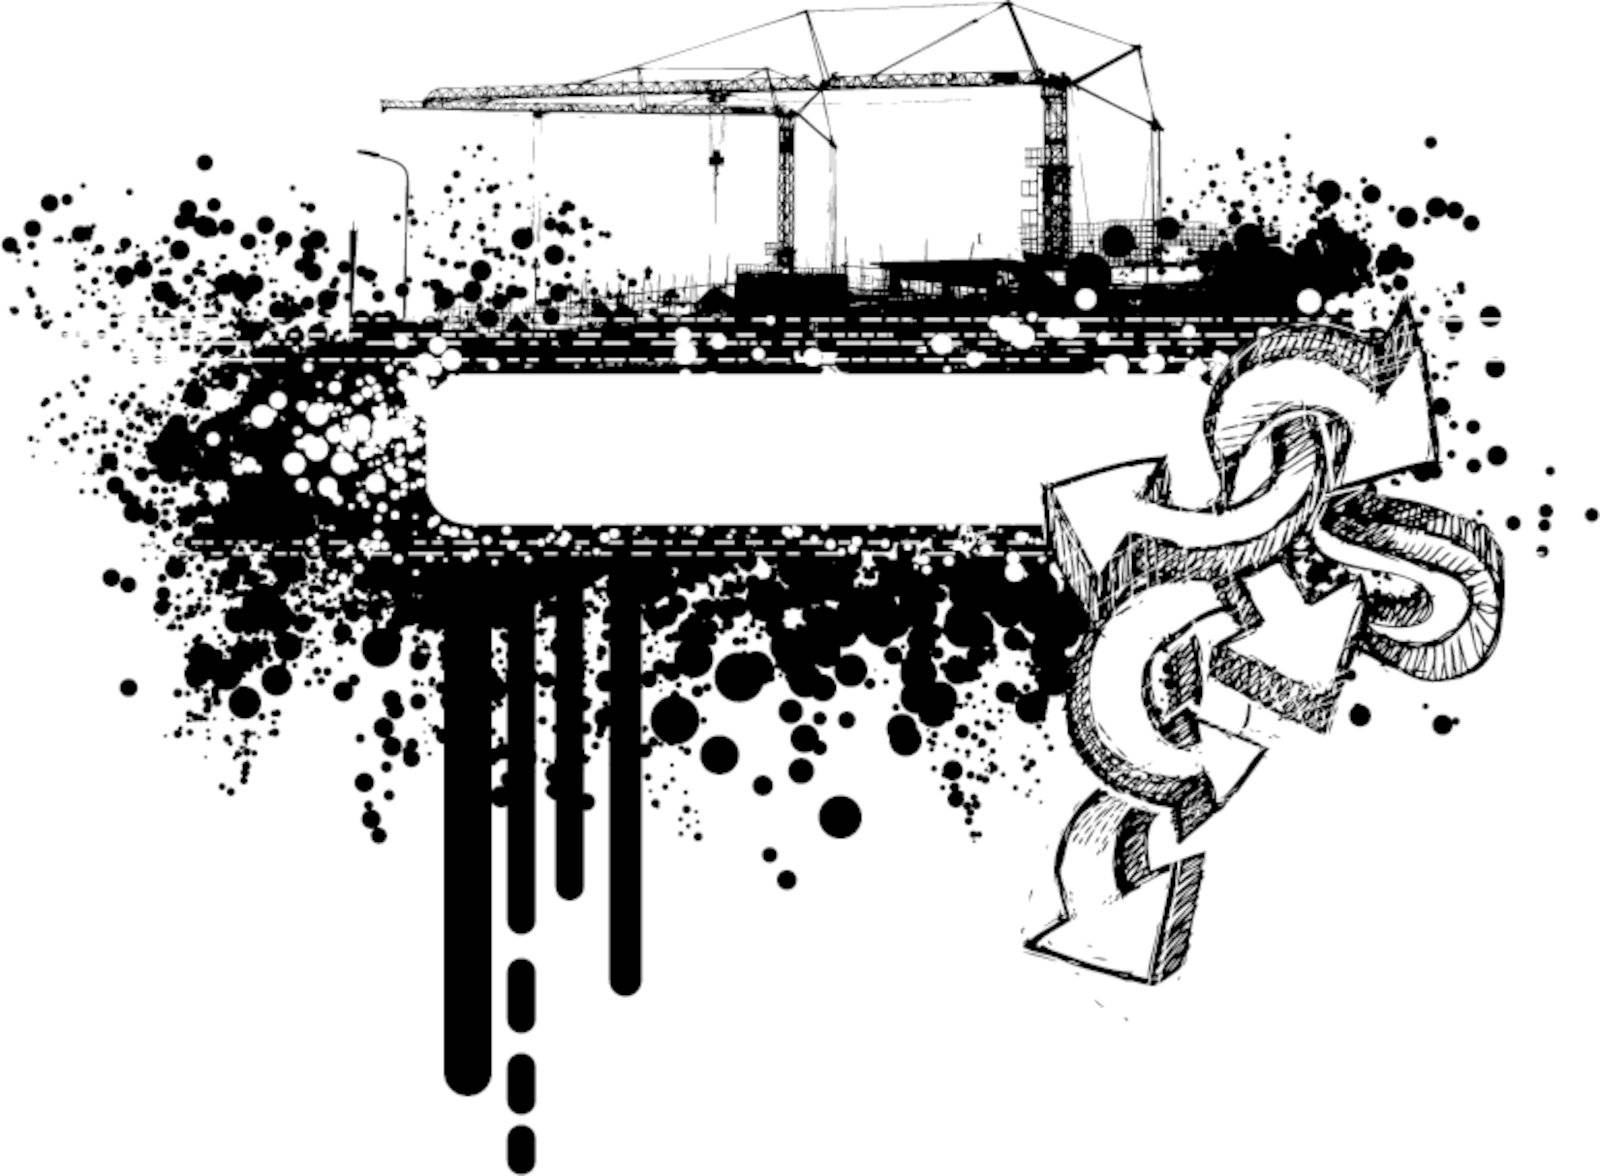 Grunge urban graphic frame with splatters, drops, stains, graffiti and cranes.